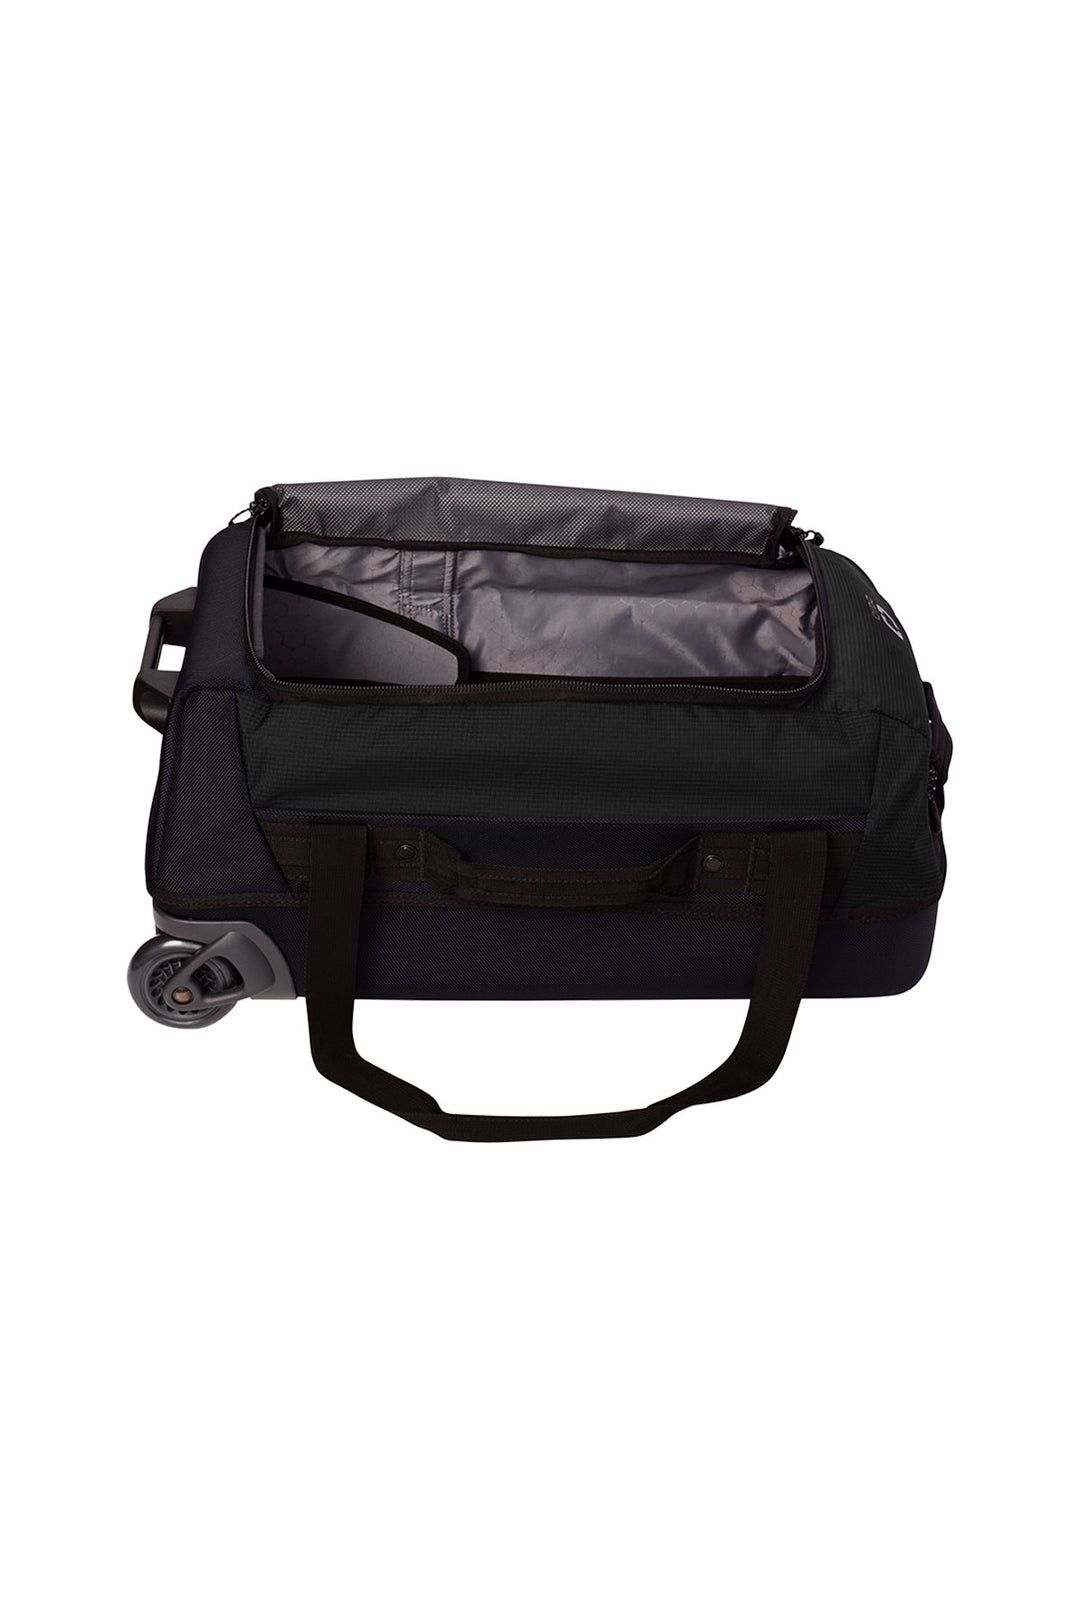 Passage Wheeled Carry-On Duffel